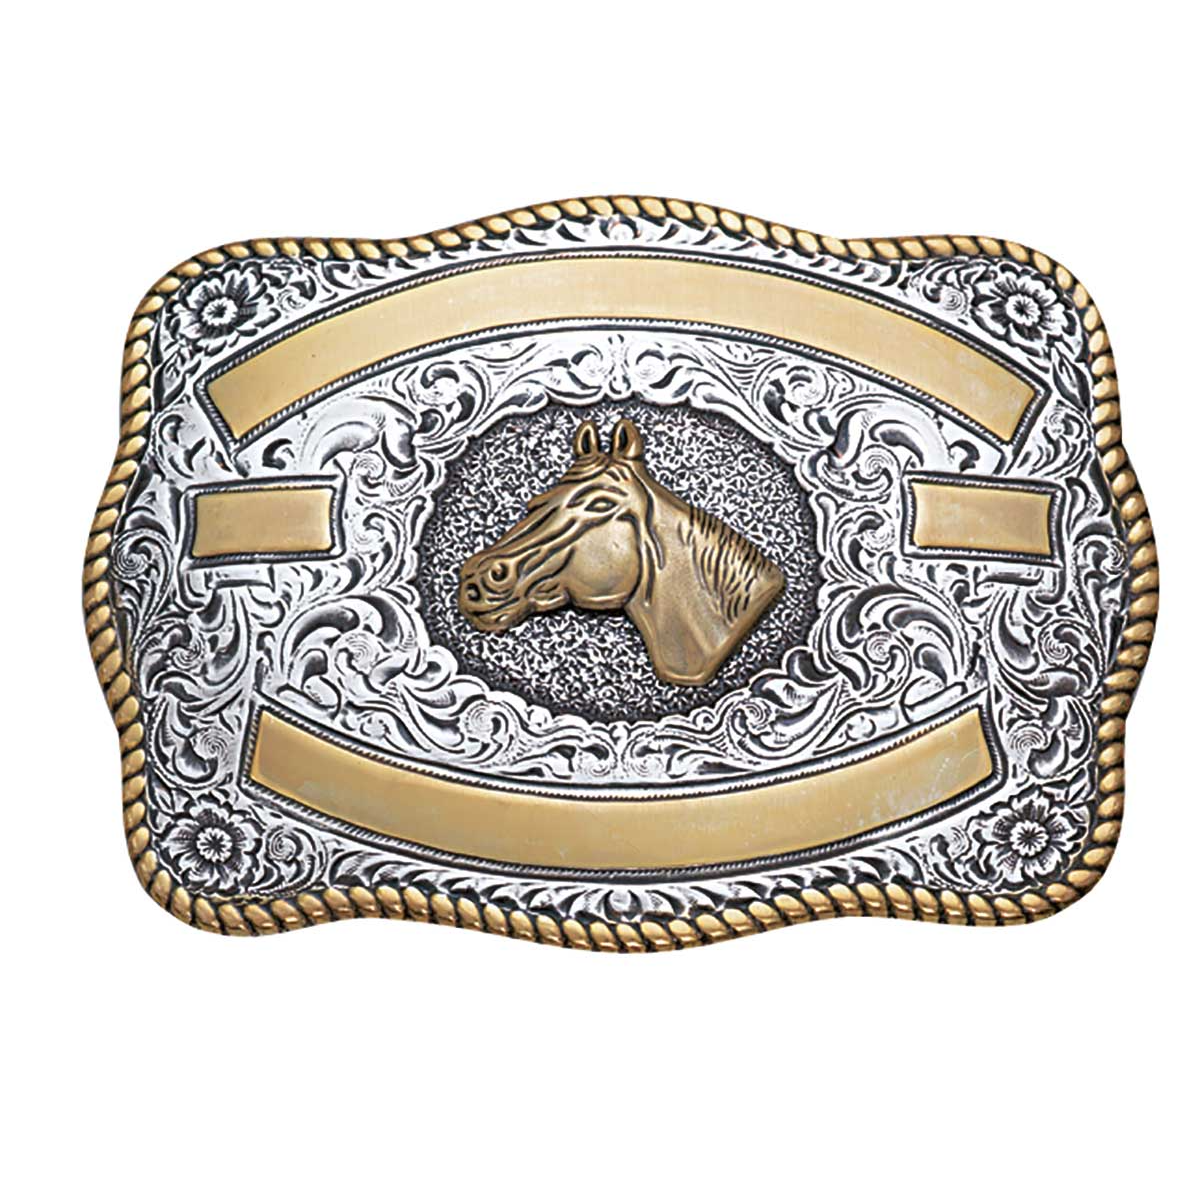 Crumrine Trophy Buckle - Antique Silver & Gold